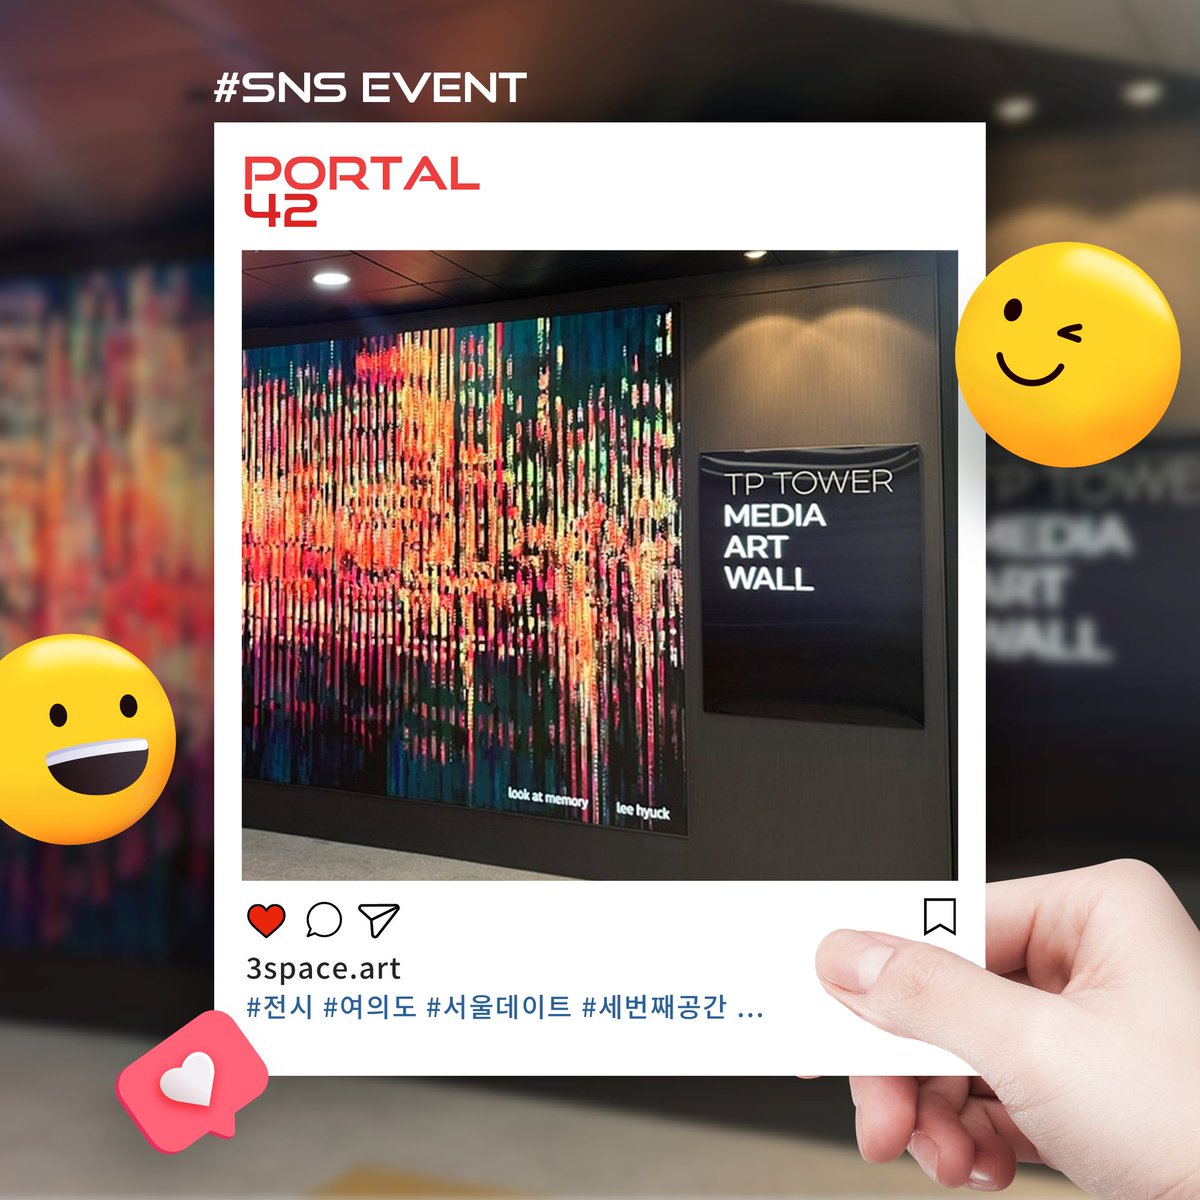 To those in Korea or plan on visiting - we are hosting a giveaway event until the 30th!

Proof of Exhibit 📸
Visit Portal 42 and upload a selfie taken in front of an exhibited artwork and upload

1️⃣ Visit the Portal 42 exhibition and take selfie.
2️⃣ When uploading to your own